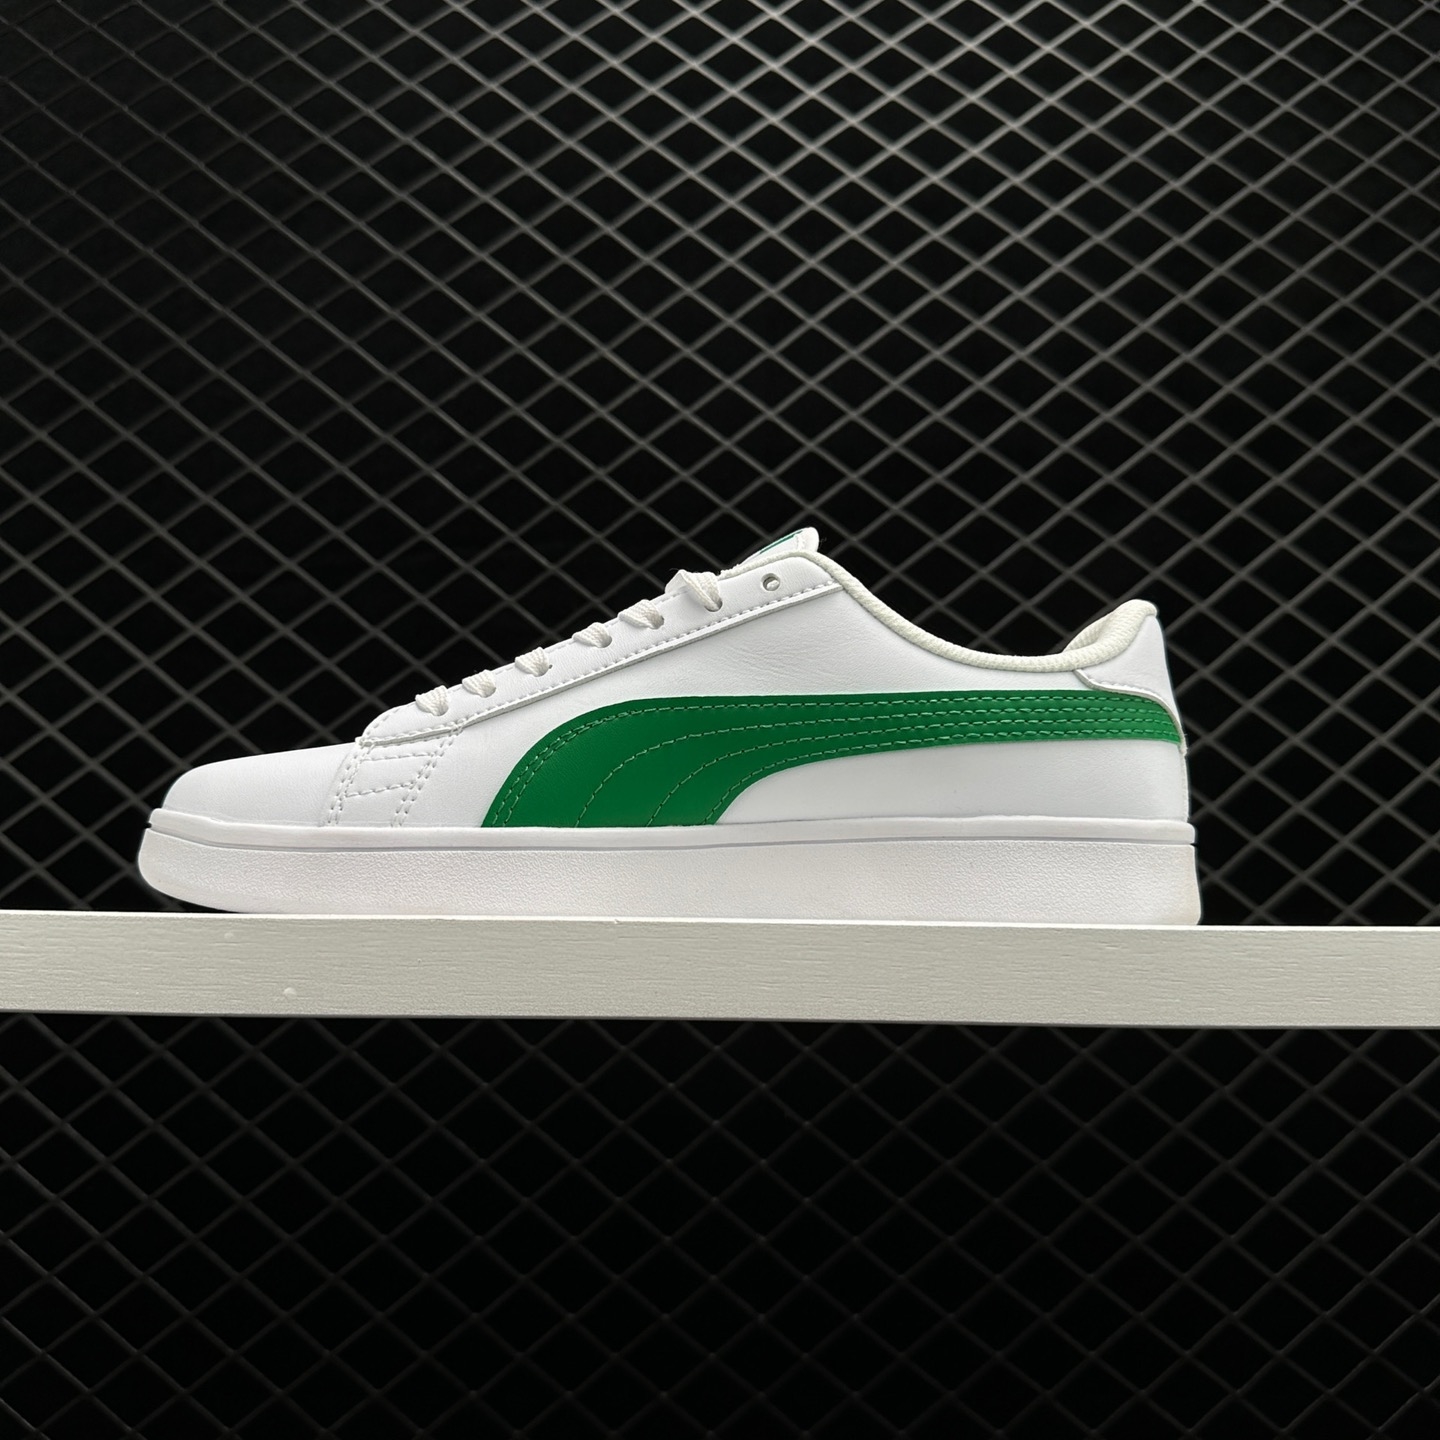 Puma Smash V2 White Green - Stylish Sneakers for a Fresh Look!